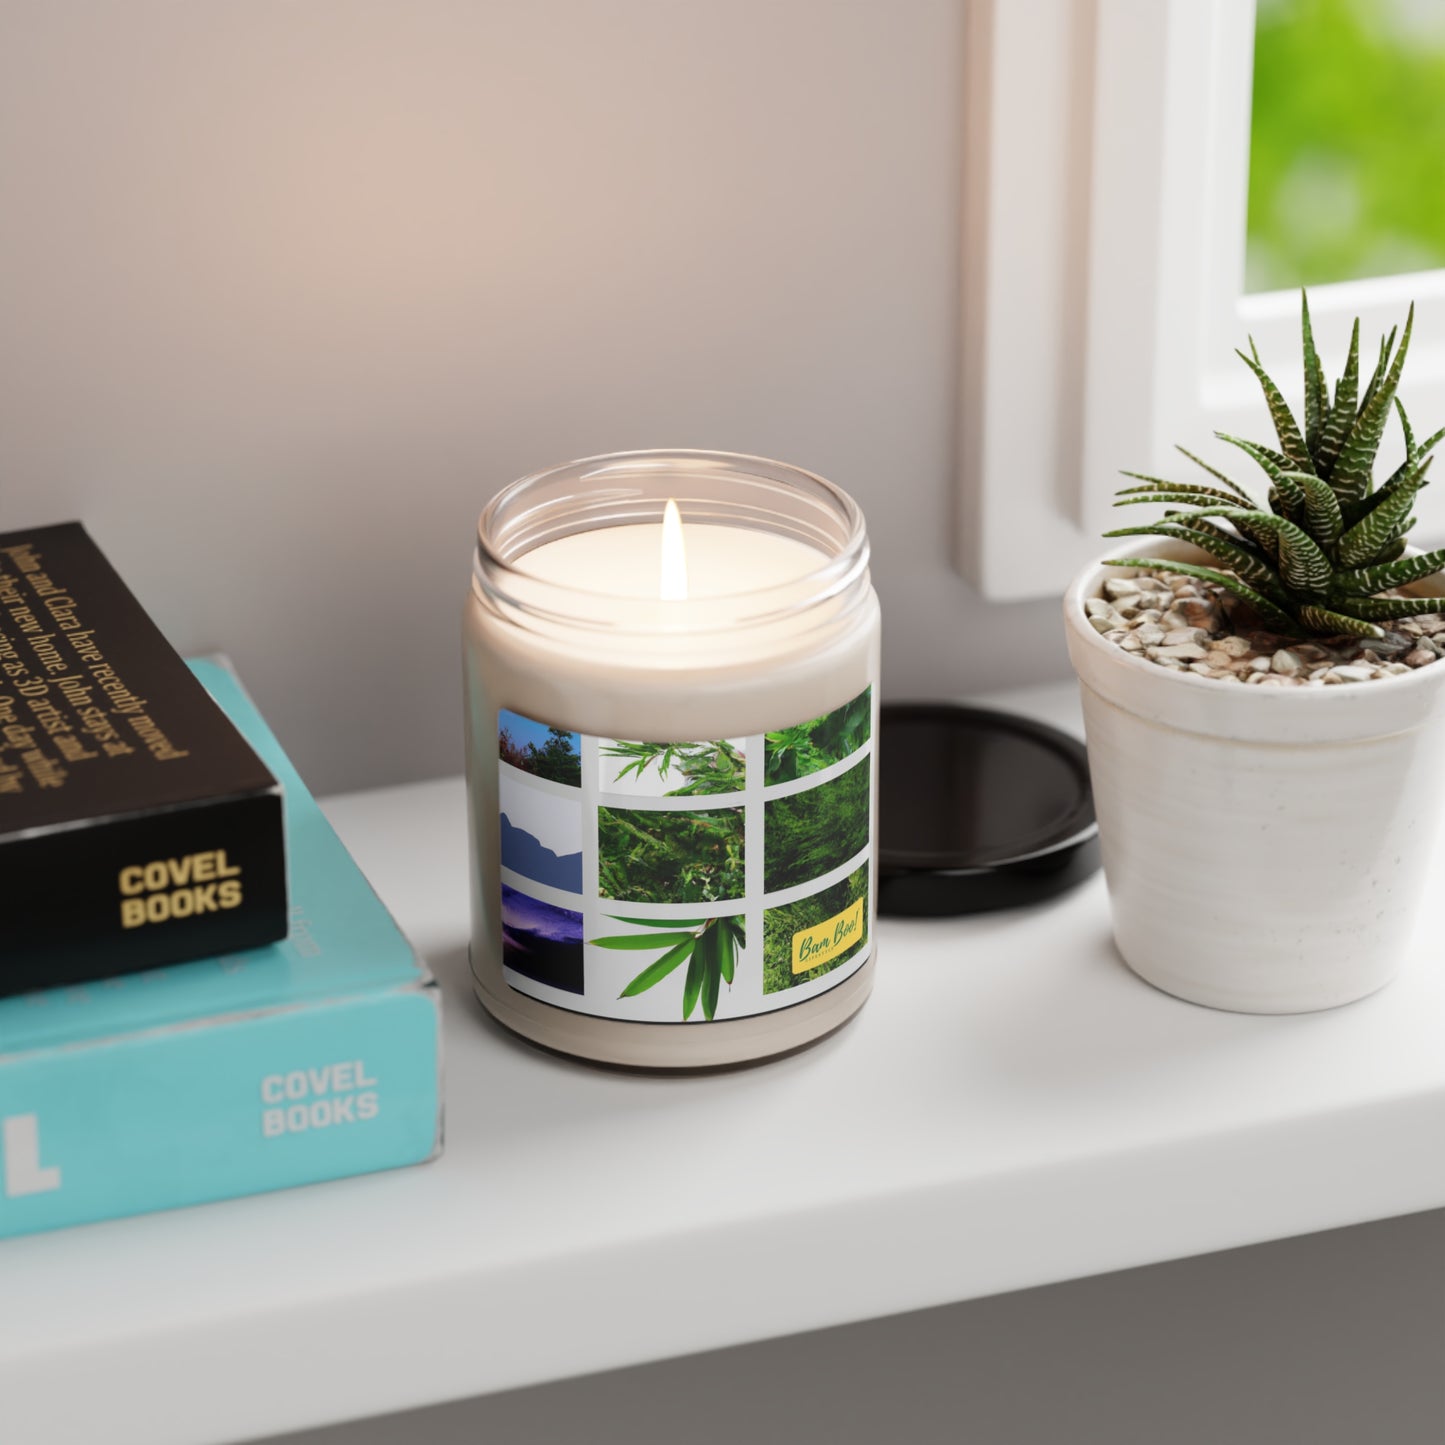 "Exploring the Intertwined Nature of Technology and Nature" - Bam Boo! Lifestyle Eco-friendly Soy Candle